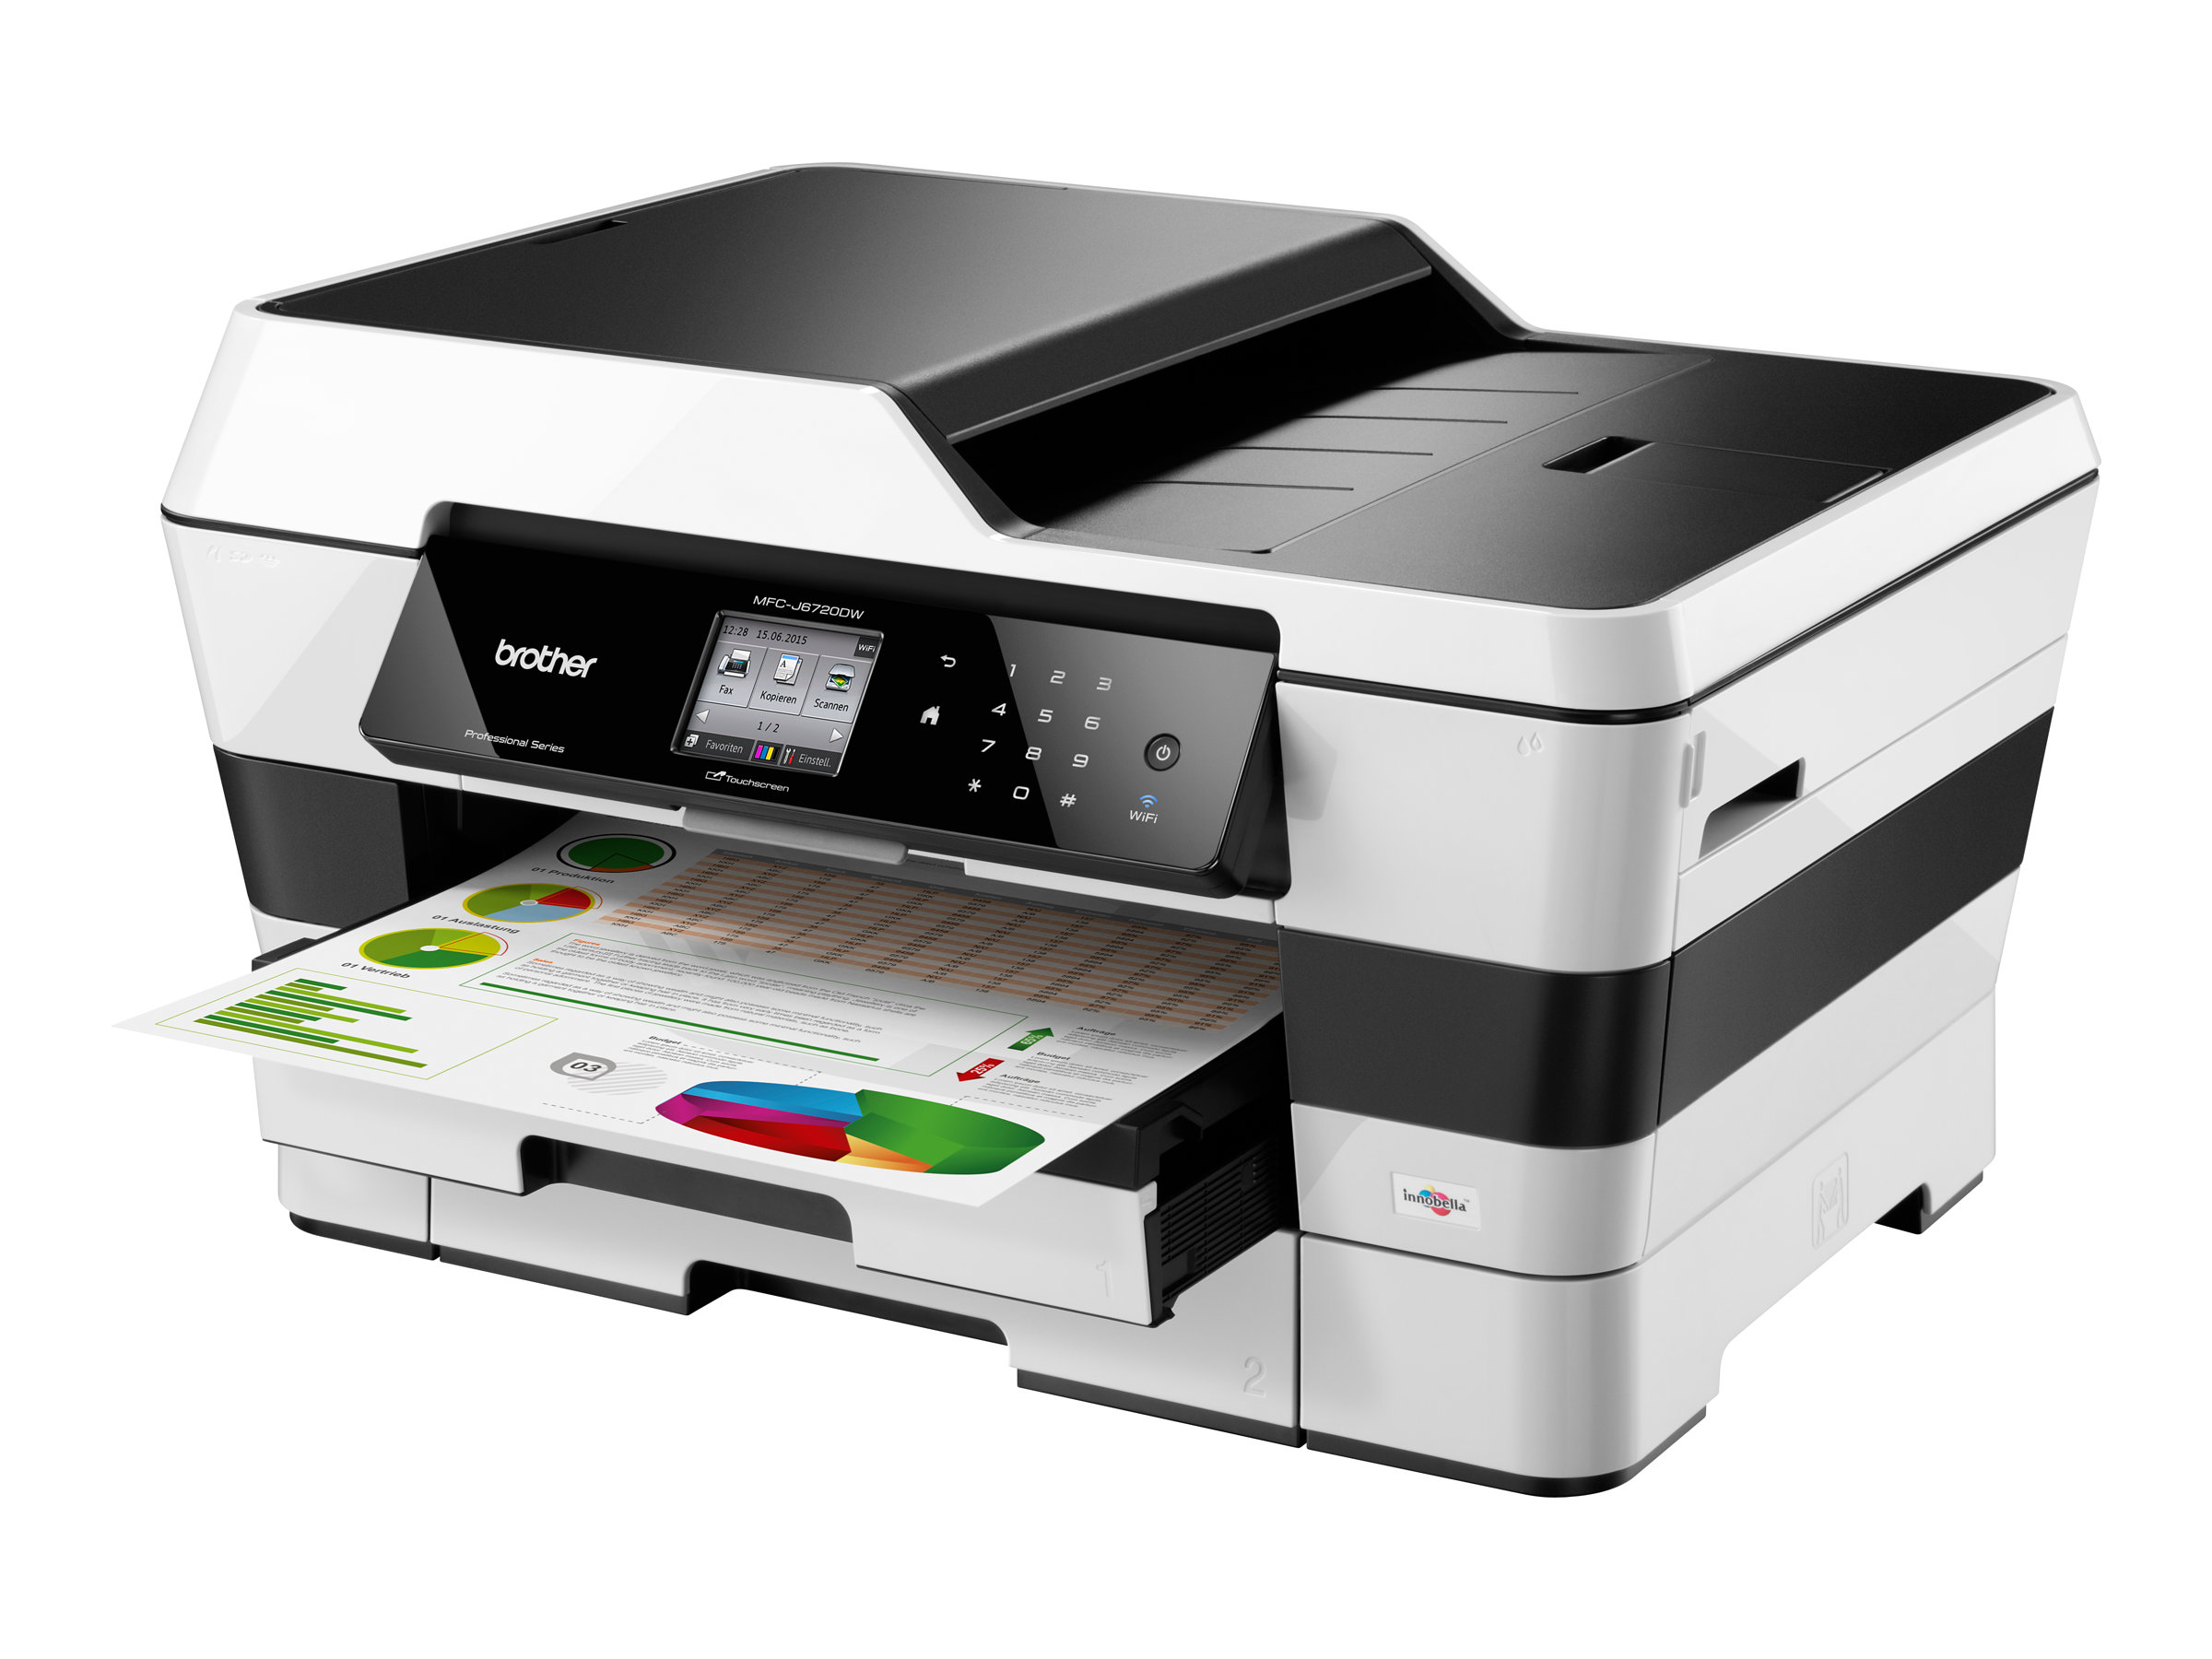 Brother MFC-J6720DW Wireless Inkjet Color Printer with Scanner, Copier and Fax - image 3 of 11